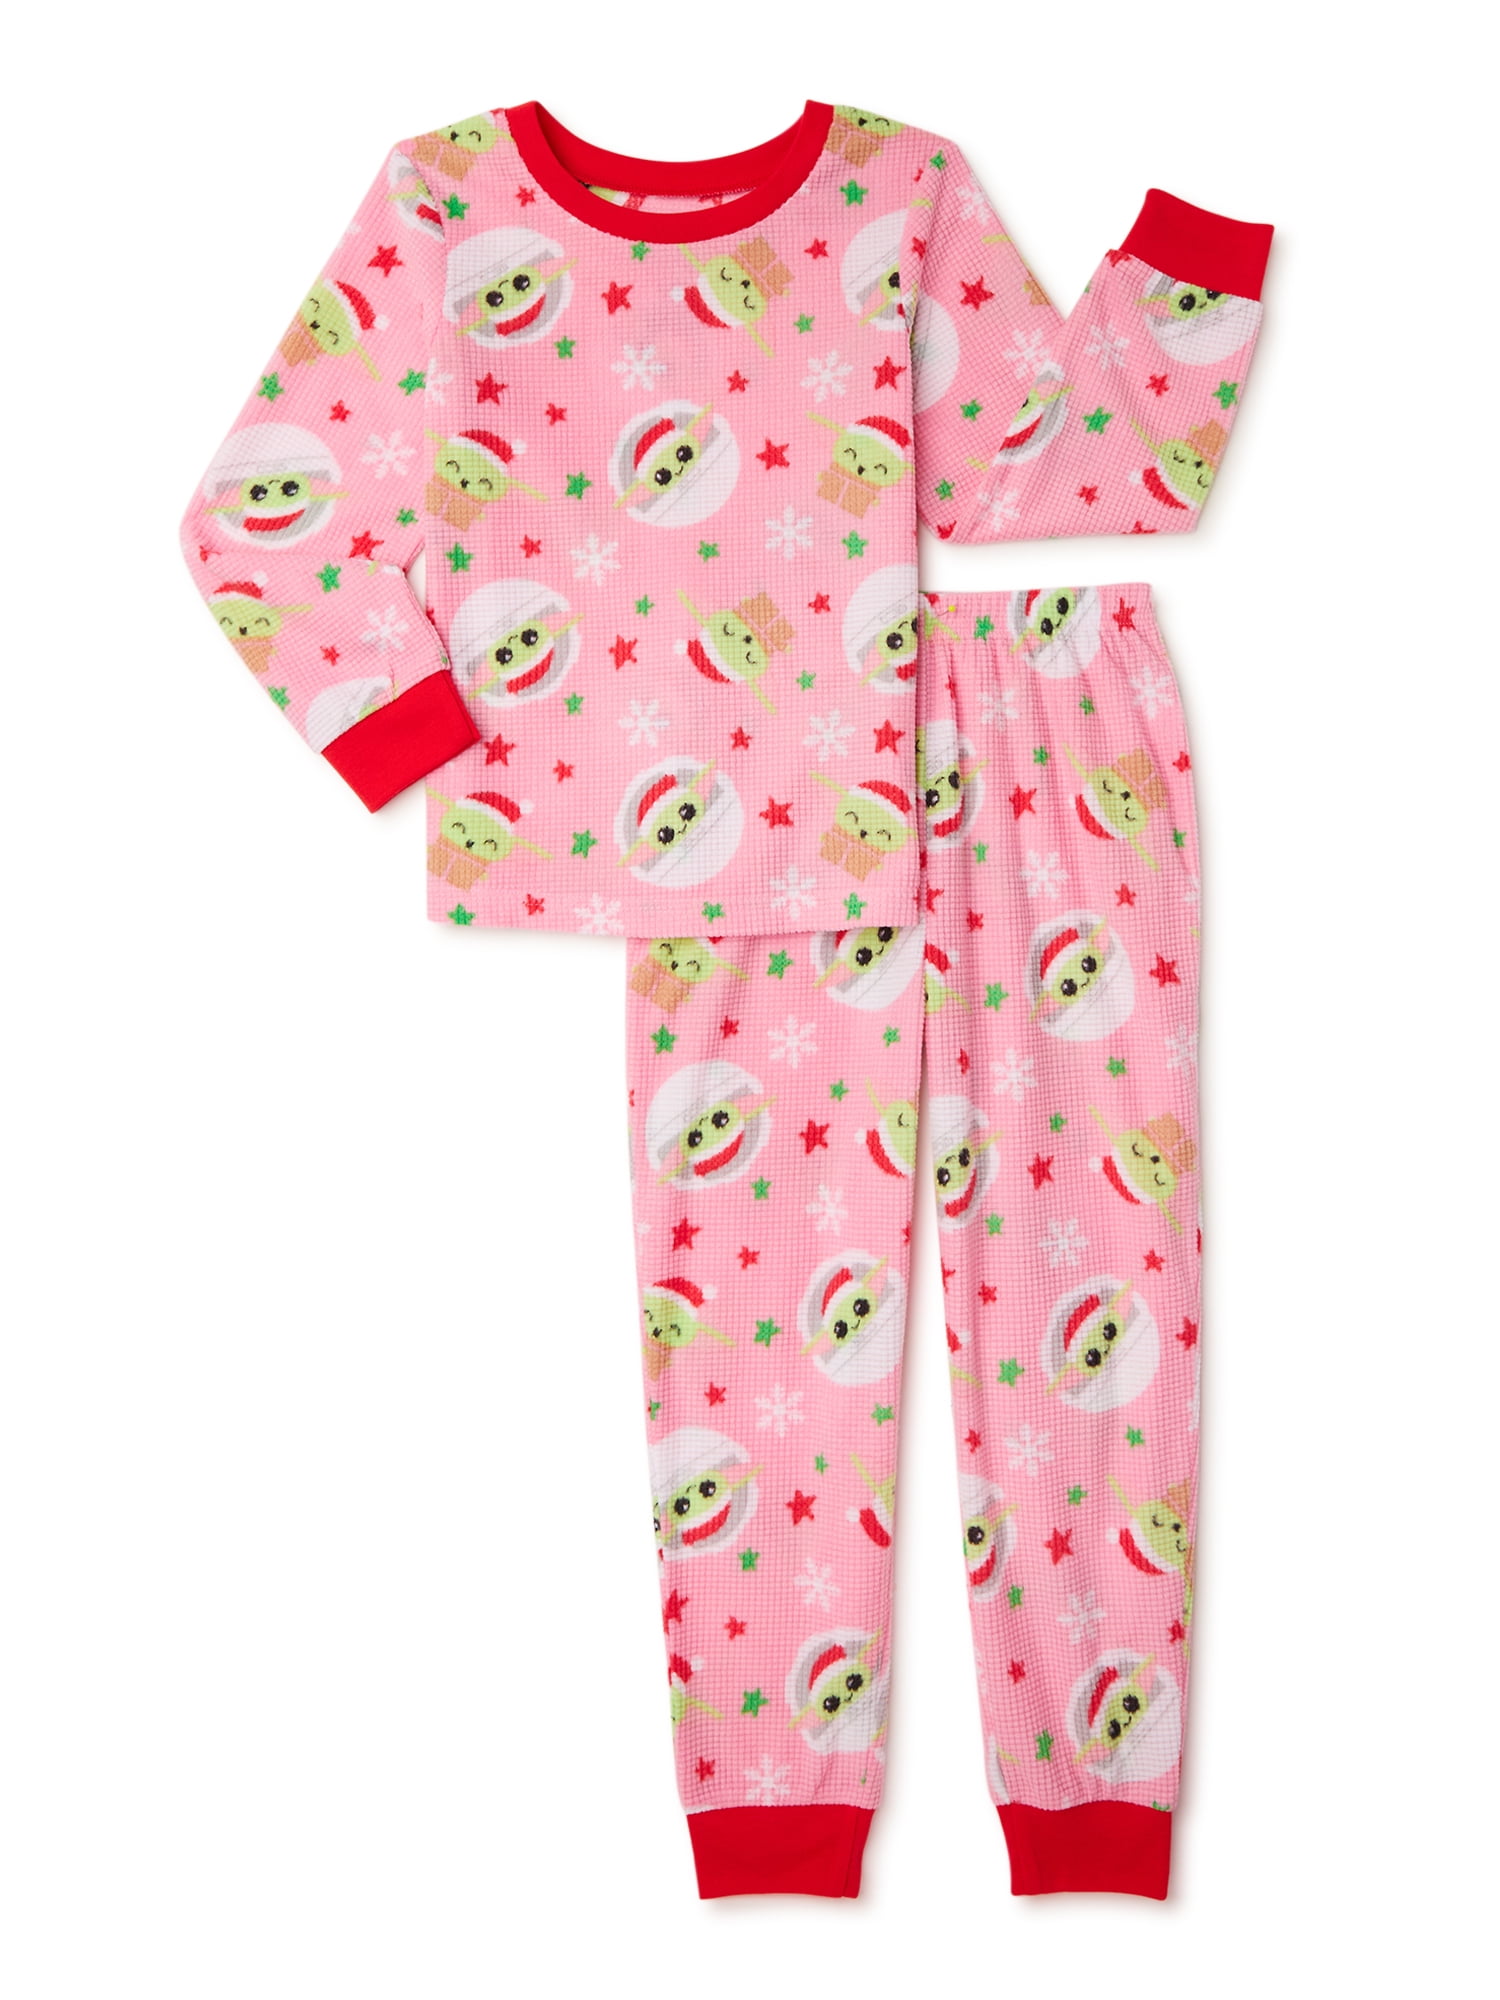 Brand New Minnie Mouse Girls 2 Pieces Pajama Set  Size 7/8 Long Sleeve Flannel 